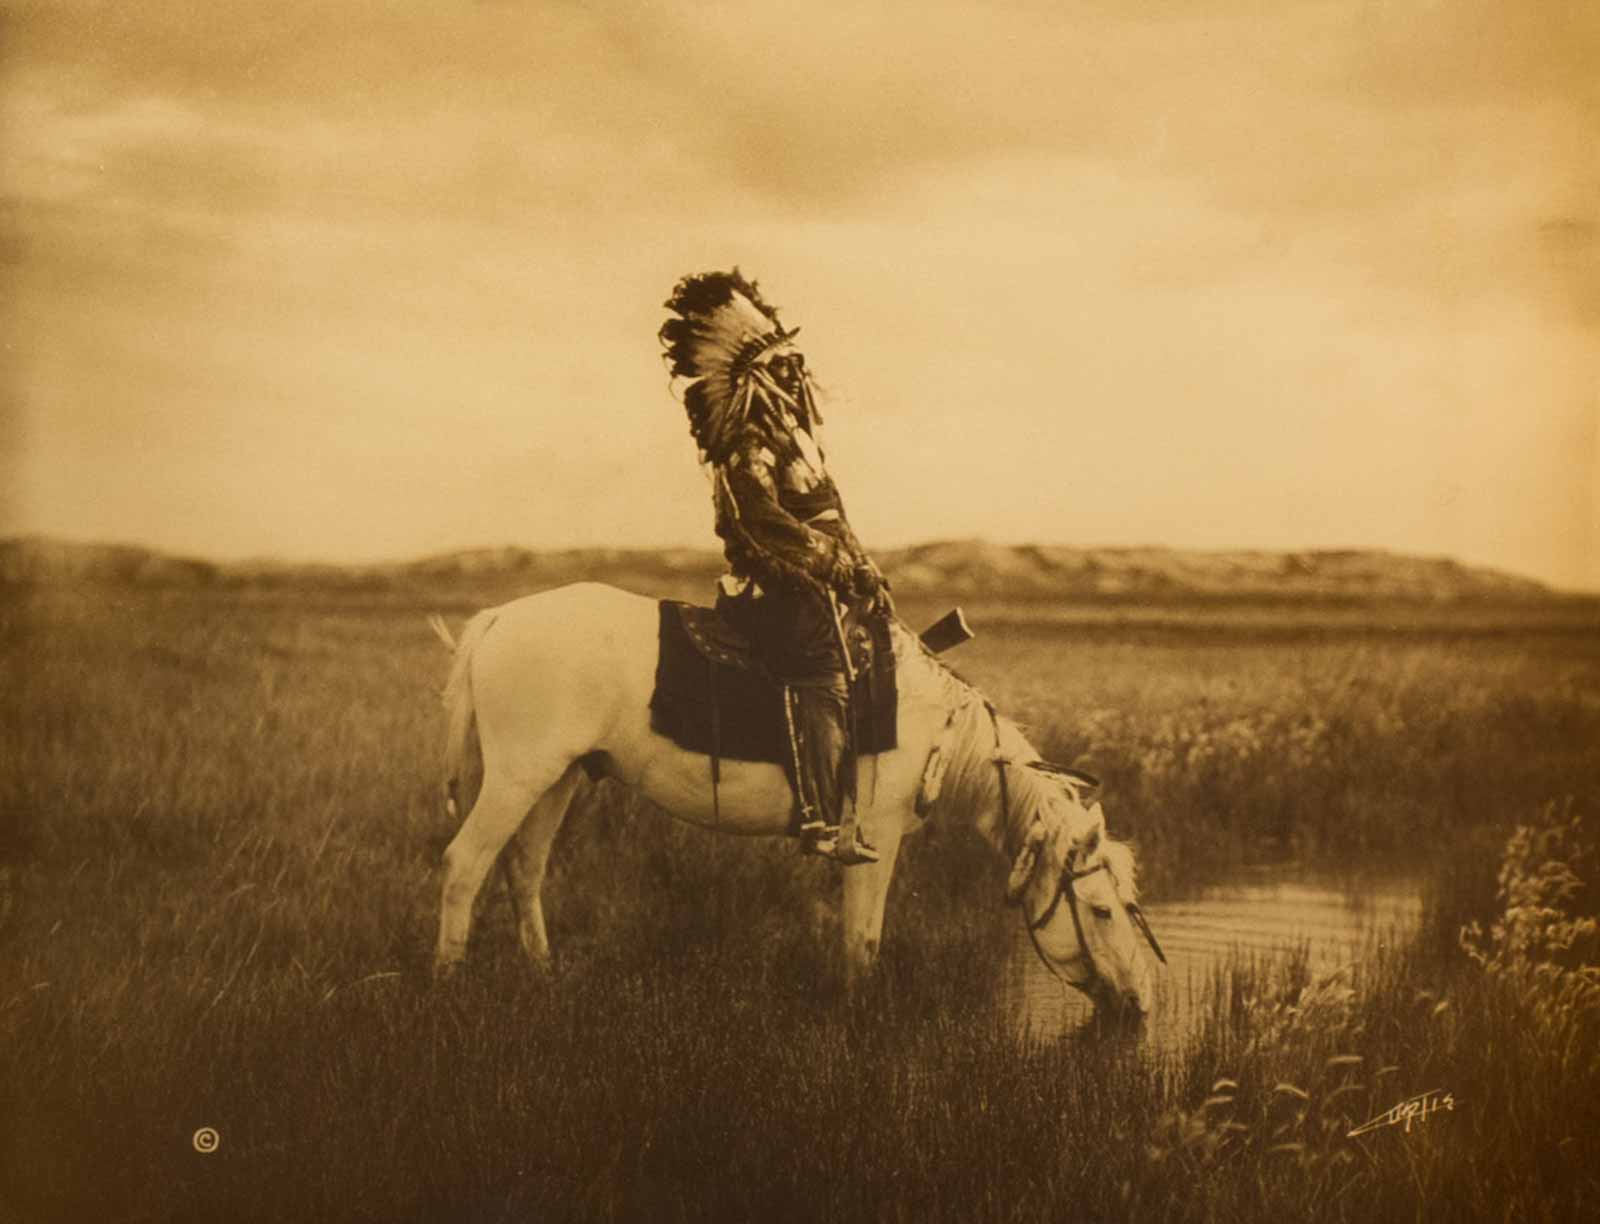 Photogravure - An Oasis in the Badlands - Sioux